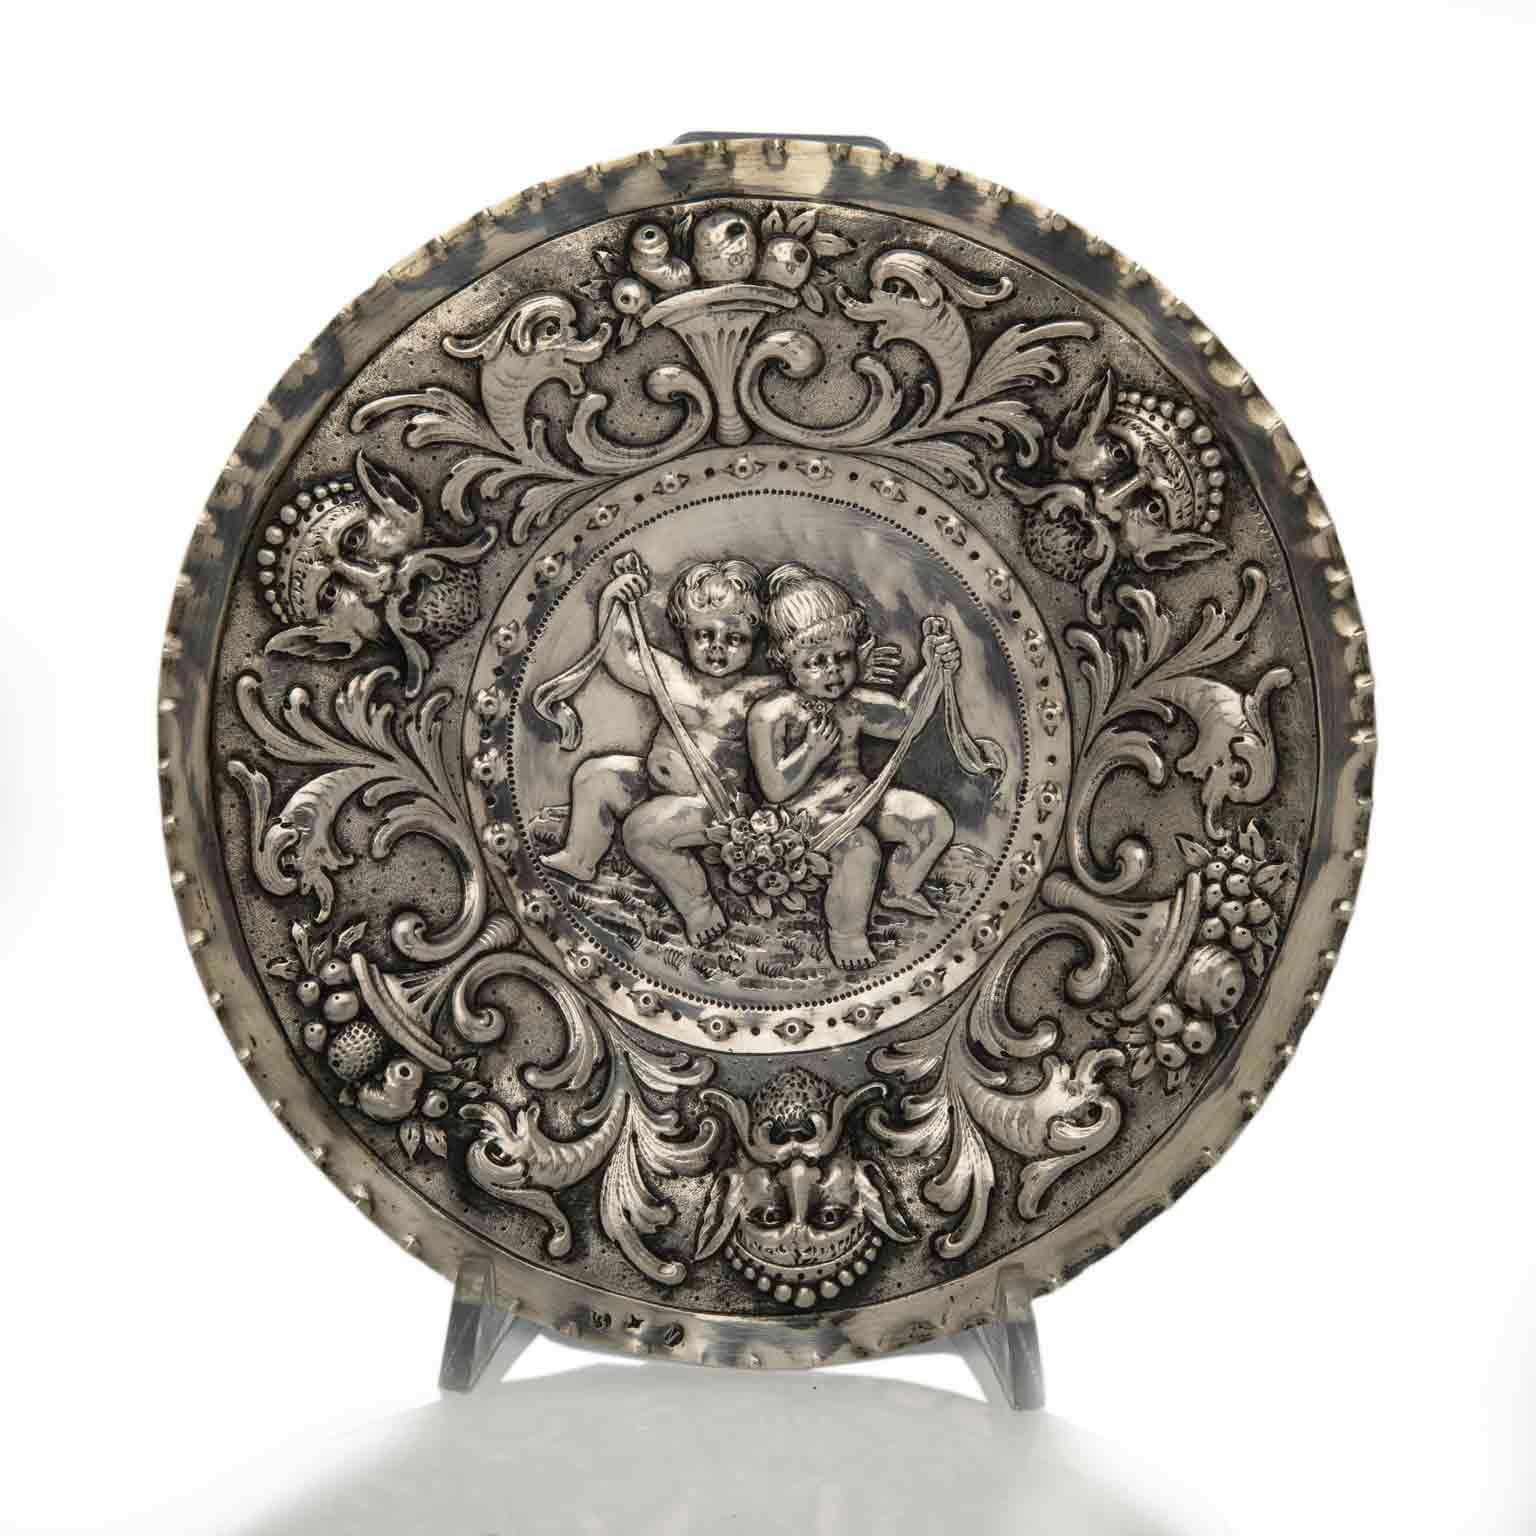 Lovely antique circular decorative silver dish, a round thick metal sheet centered by hand repoussé children figures playing with ribbons and flowers and superlative bas relief hand chased allegorical grottesques, scrolls and flowers on the round